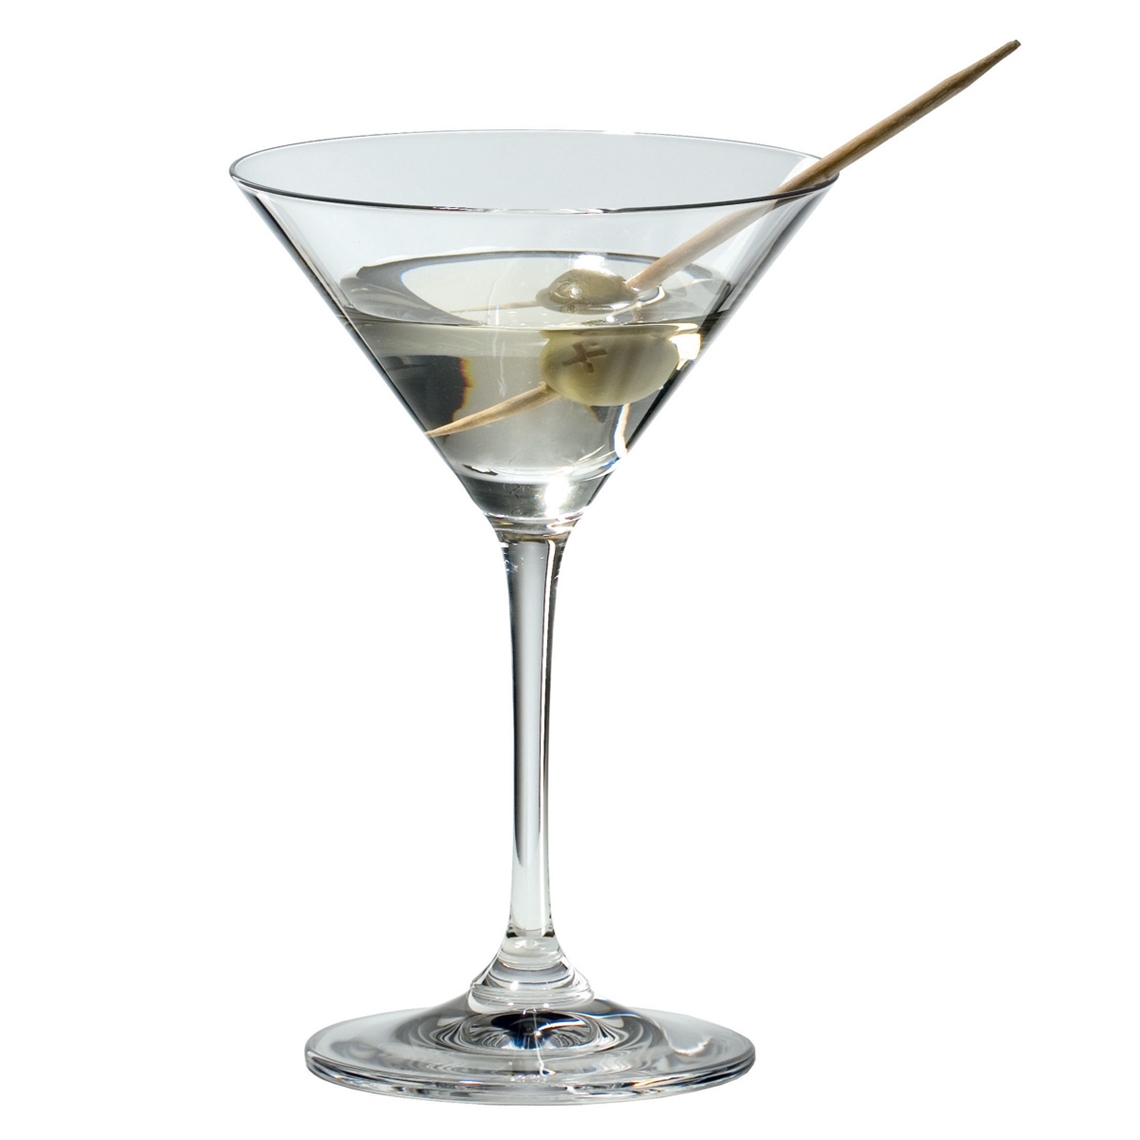 View more fortissimo from our Martini Glasses range